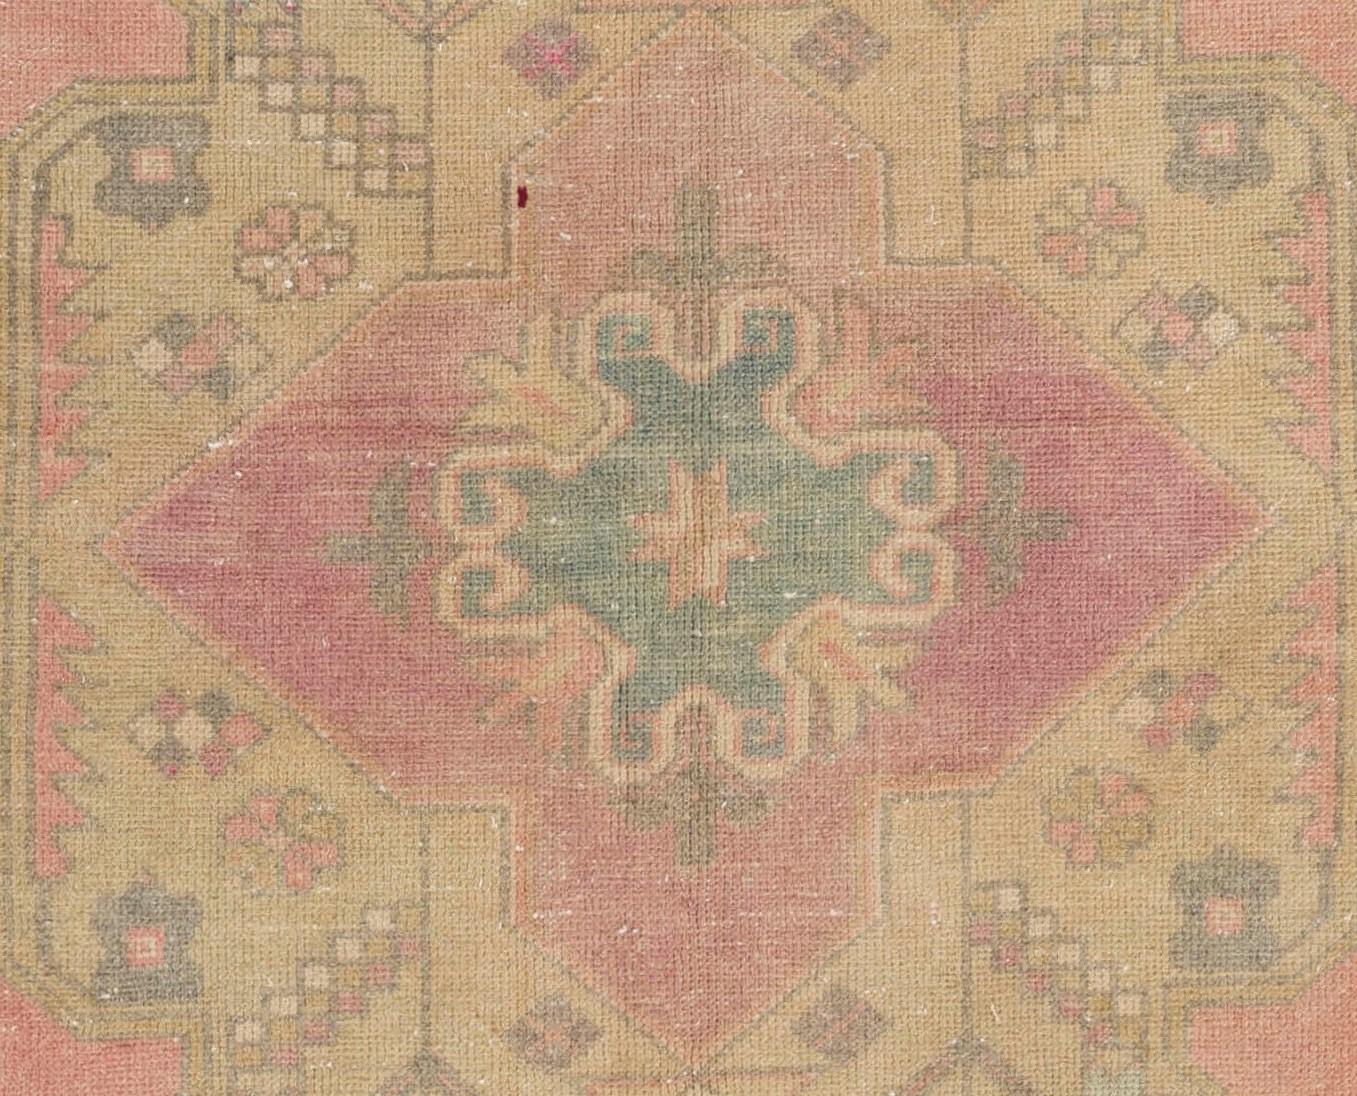 This vintage Turkish area rug features a large medallion design in soft olive green decorated with simpler, more geometric renditions of floral and star motifs that encircle two smaller, nested medallions at the centre in magenta and teal. The rest